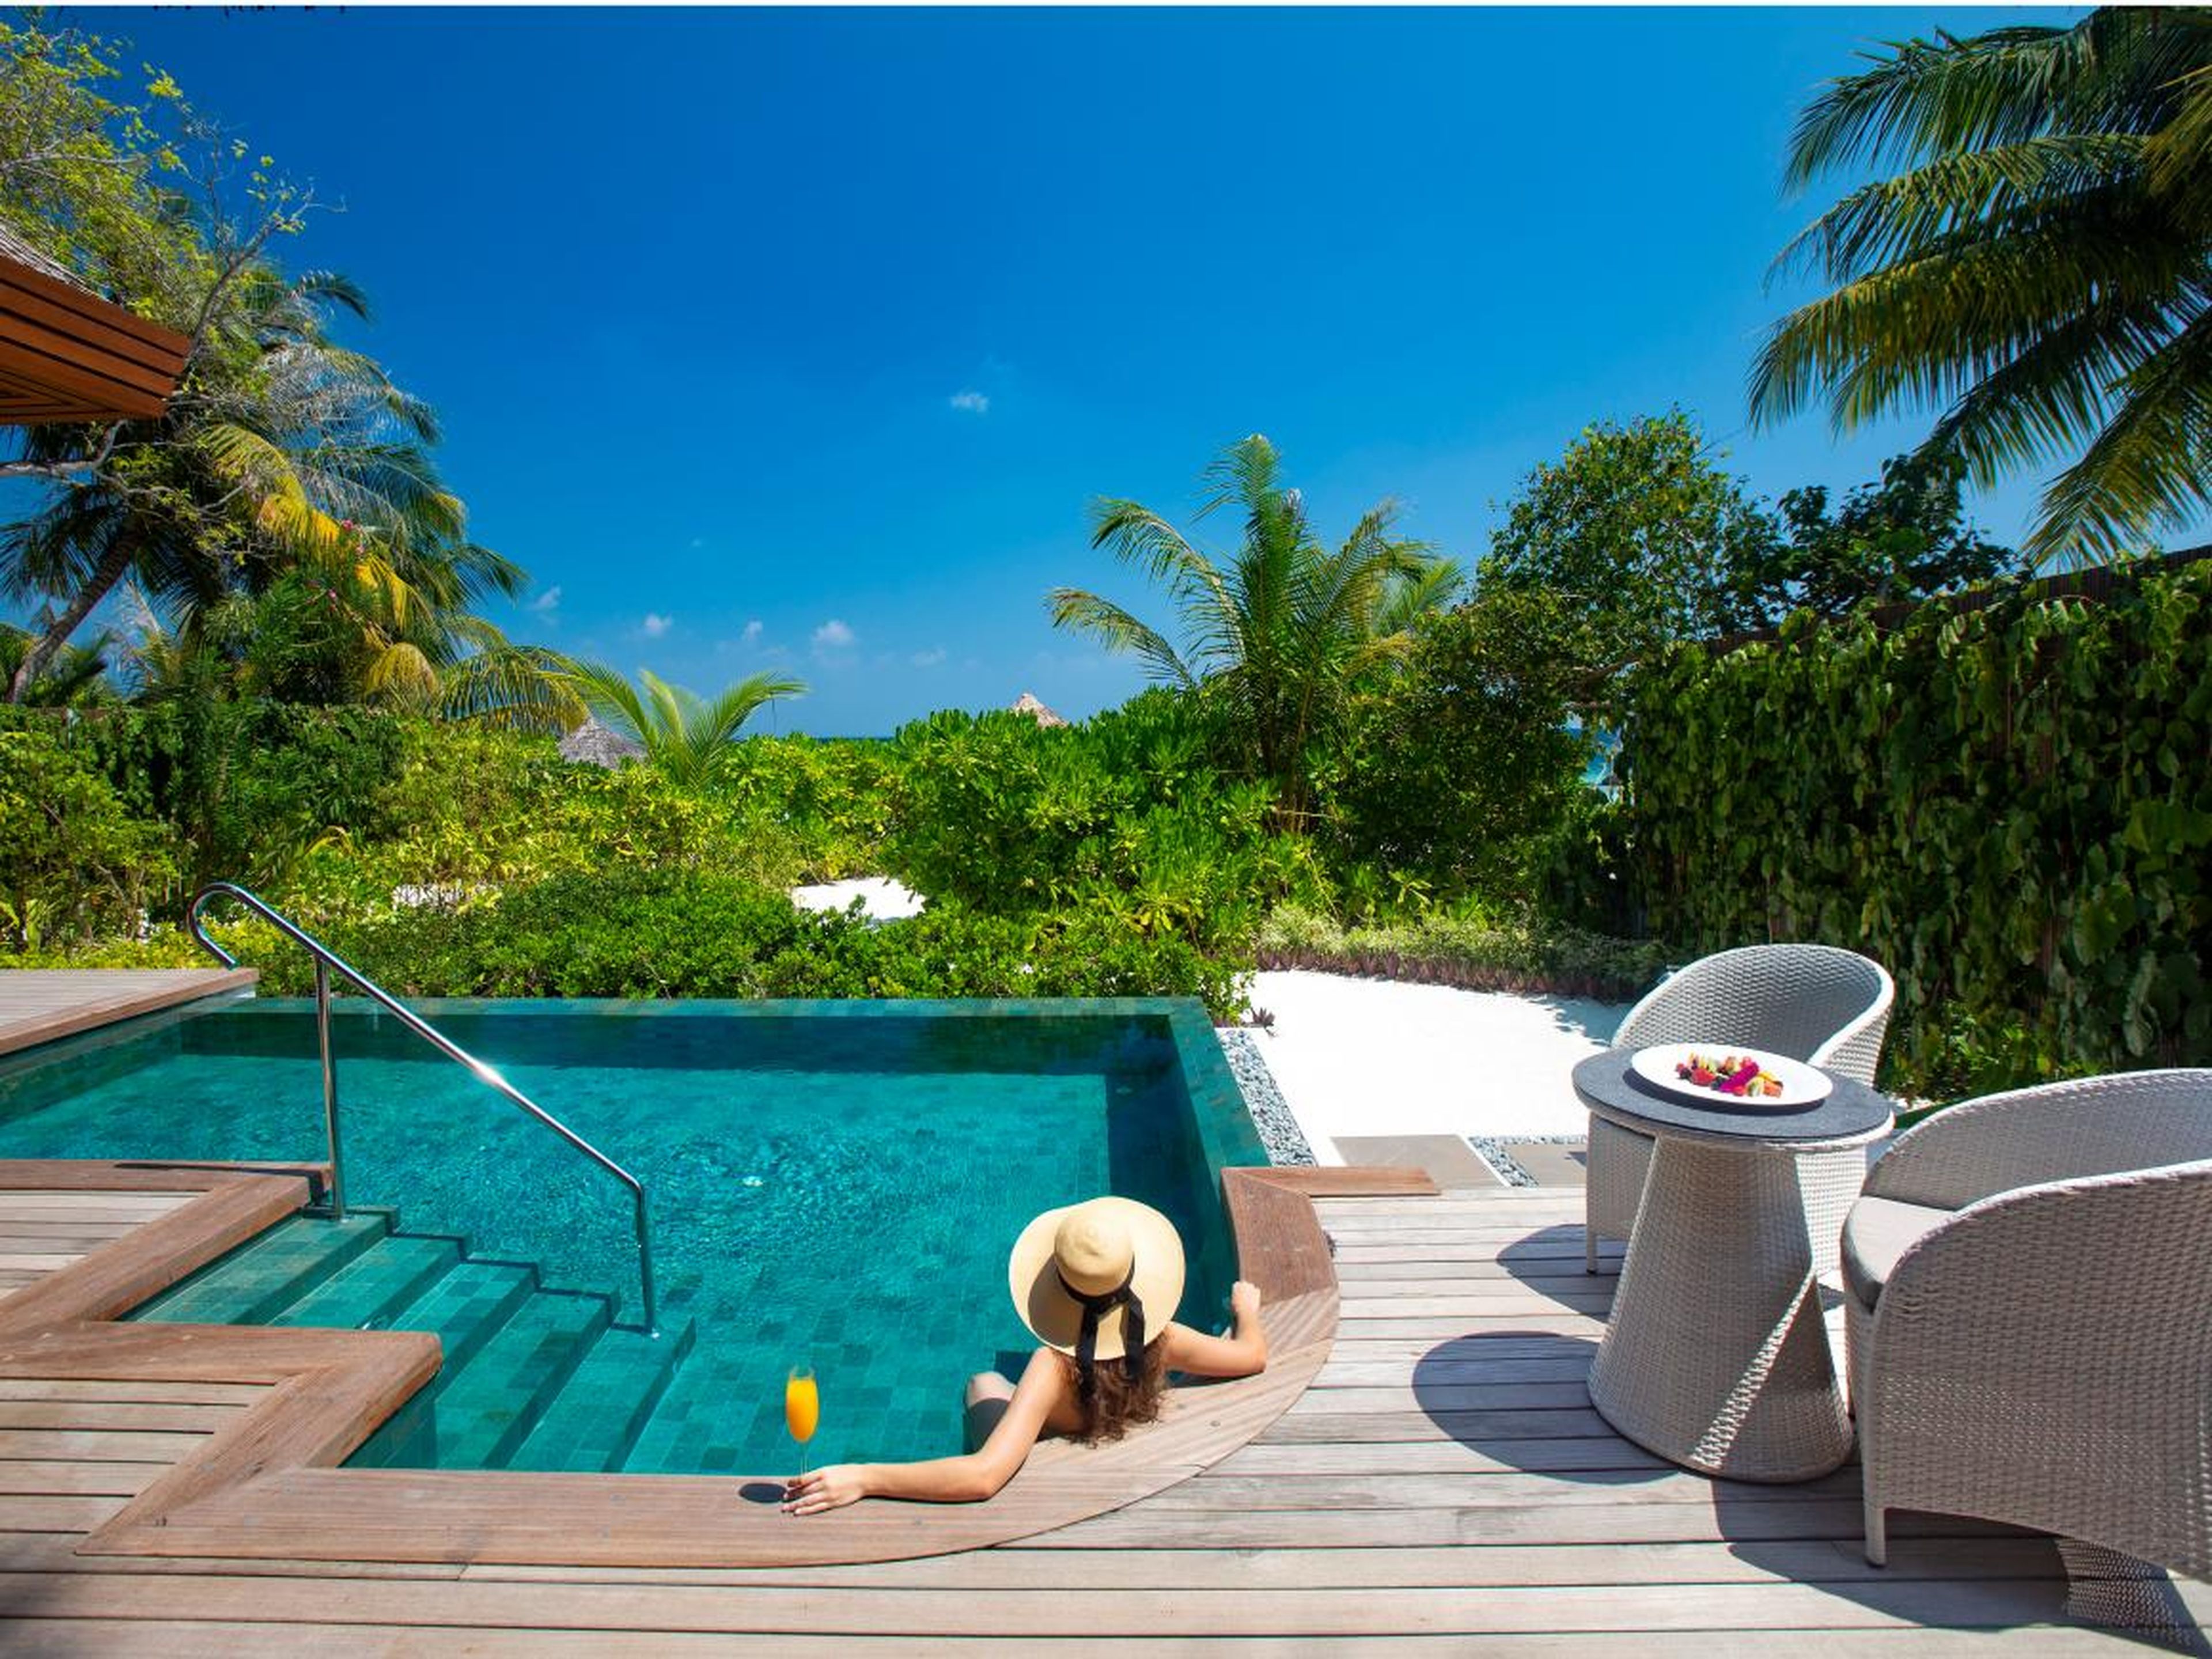 Each suite also comes with its own private infinity swimming pool and both a hot and cold Jacuzzi. Couples who stay in a Baros Suite receive a private transfer to and from the resort by luxury yacht and a bottle of Champagne on